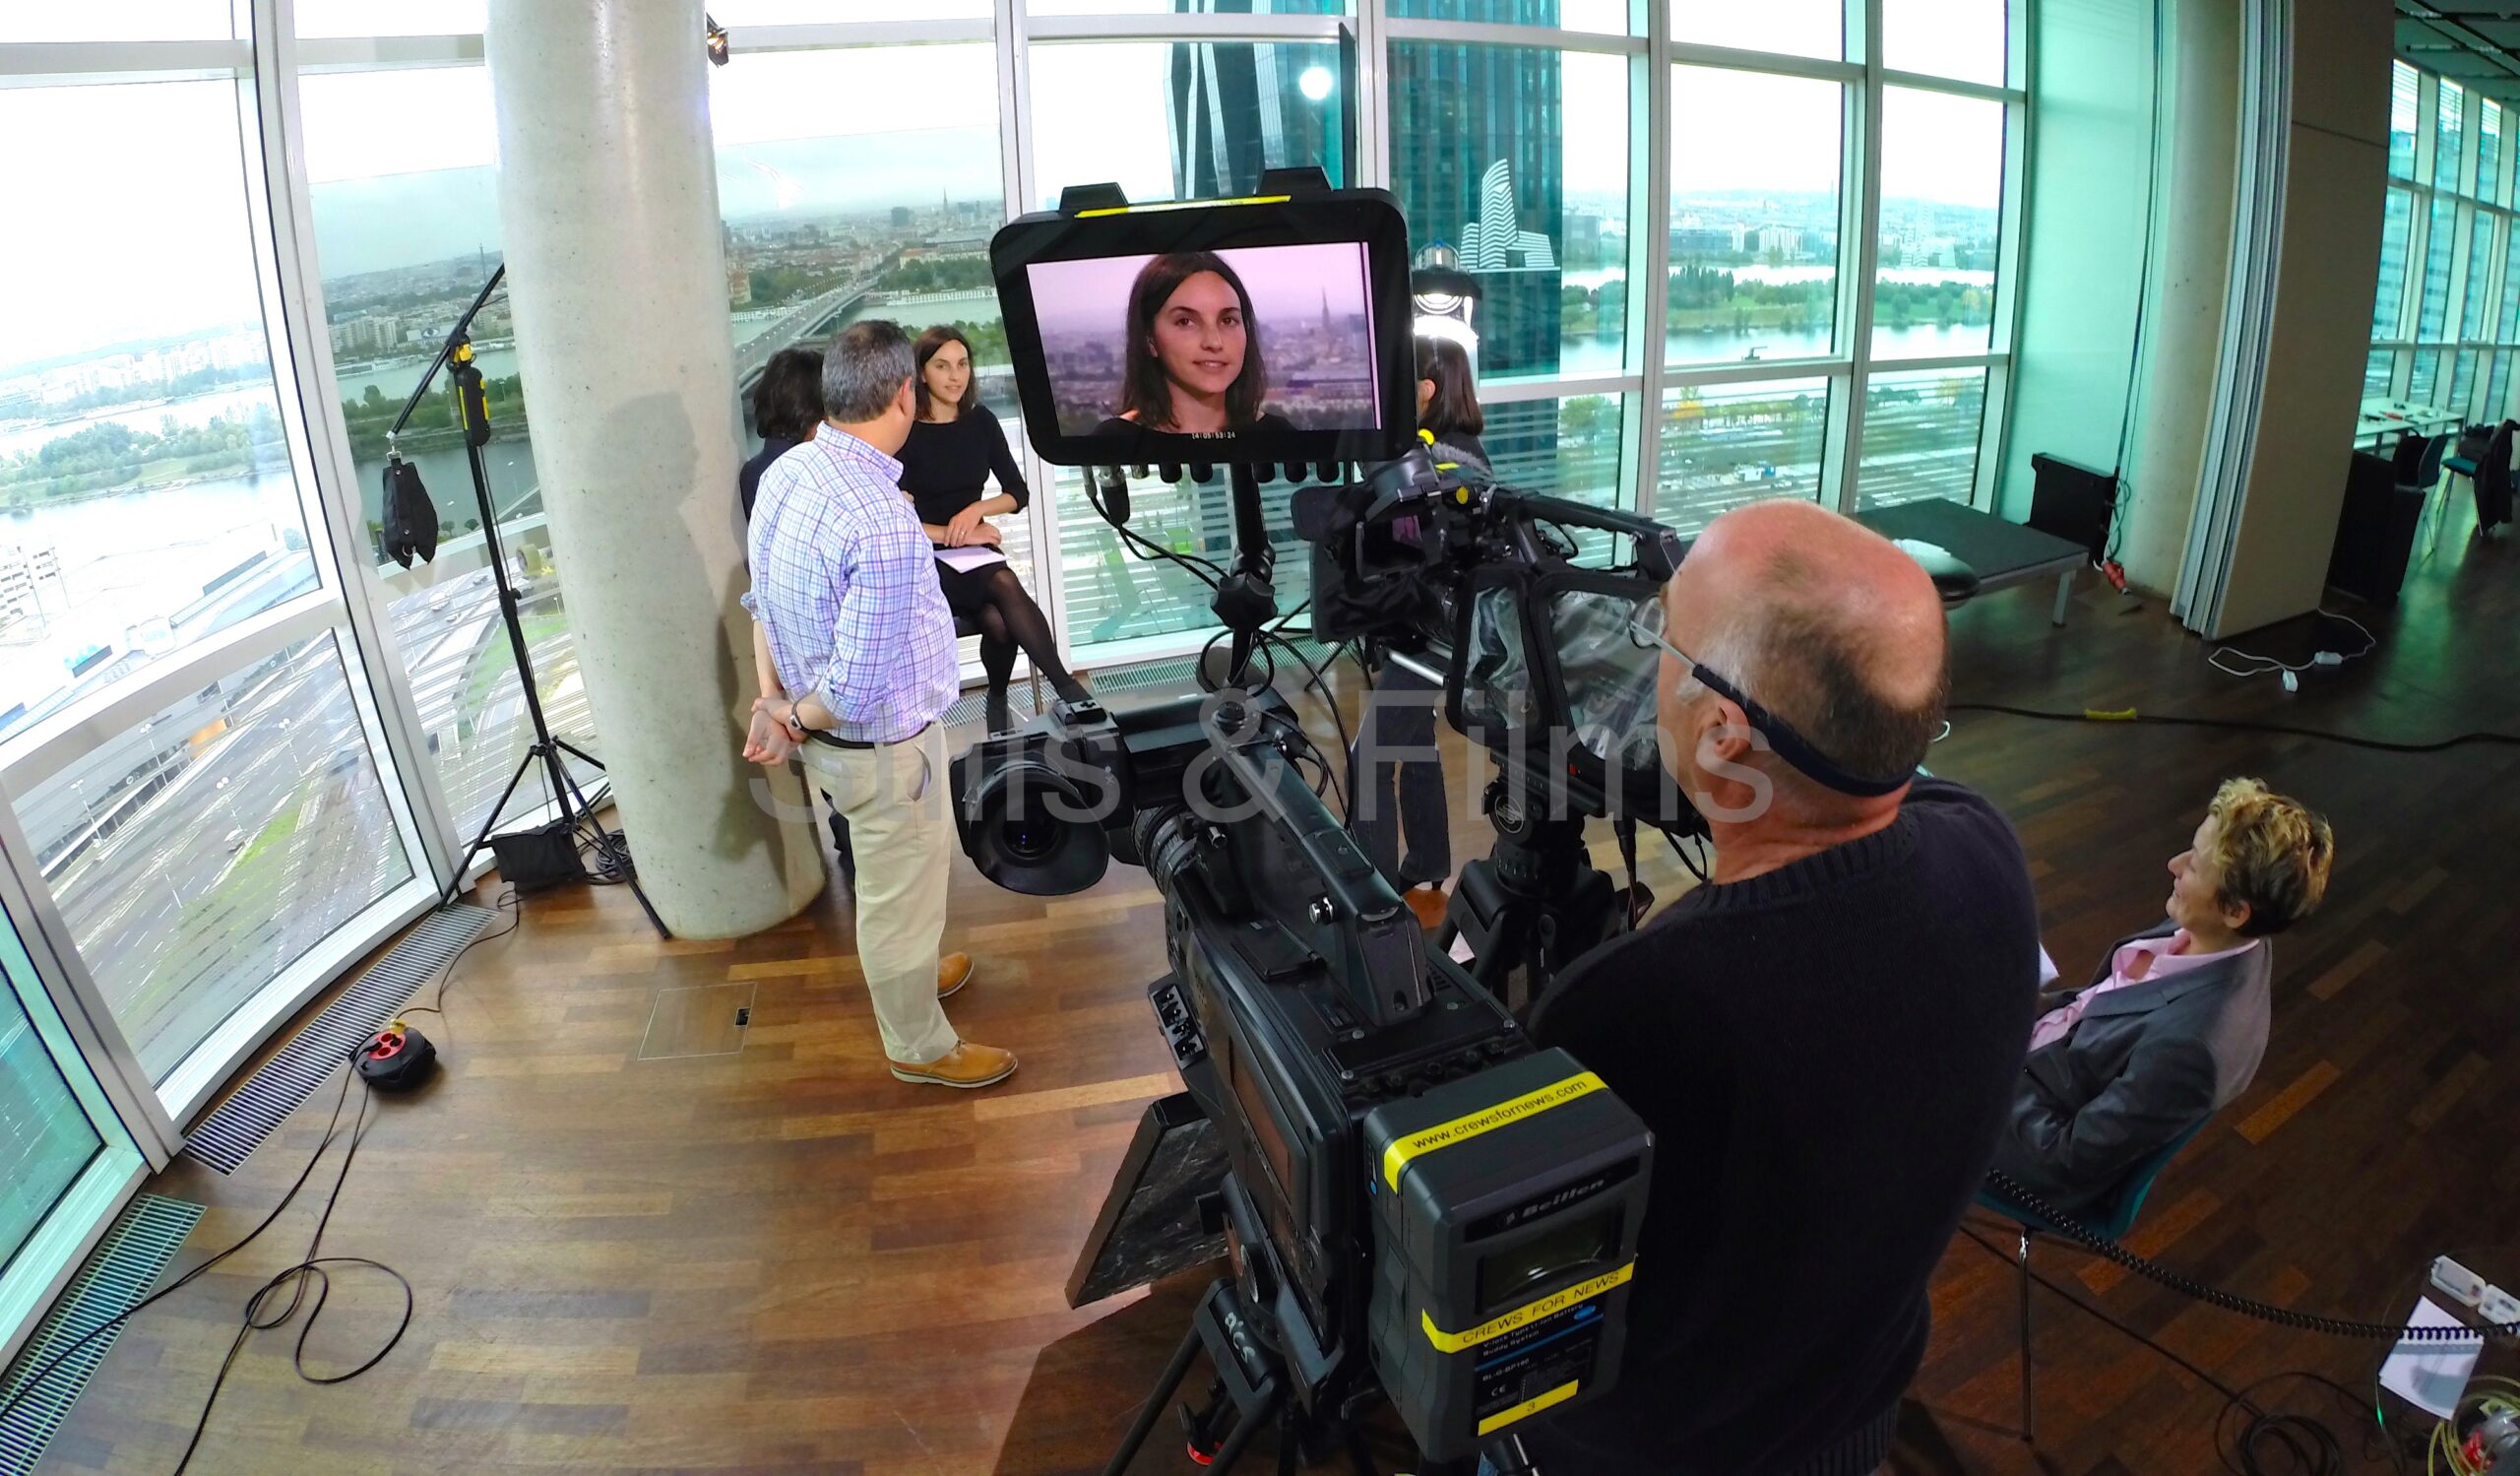 Filming for a UK programme "Control Risk" in the tallest building in Vienna